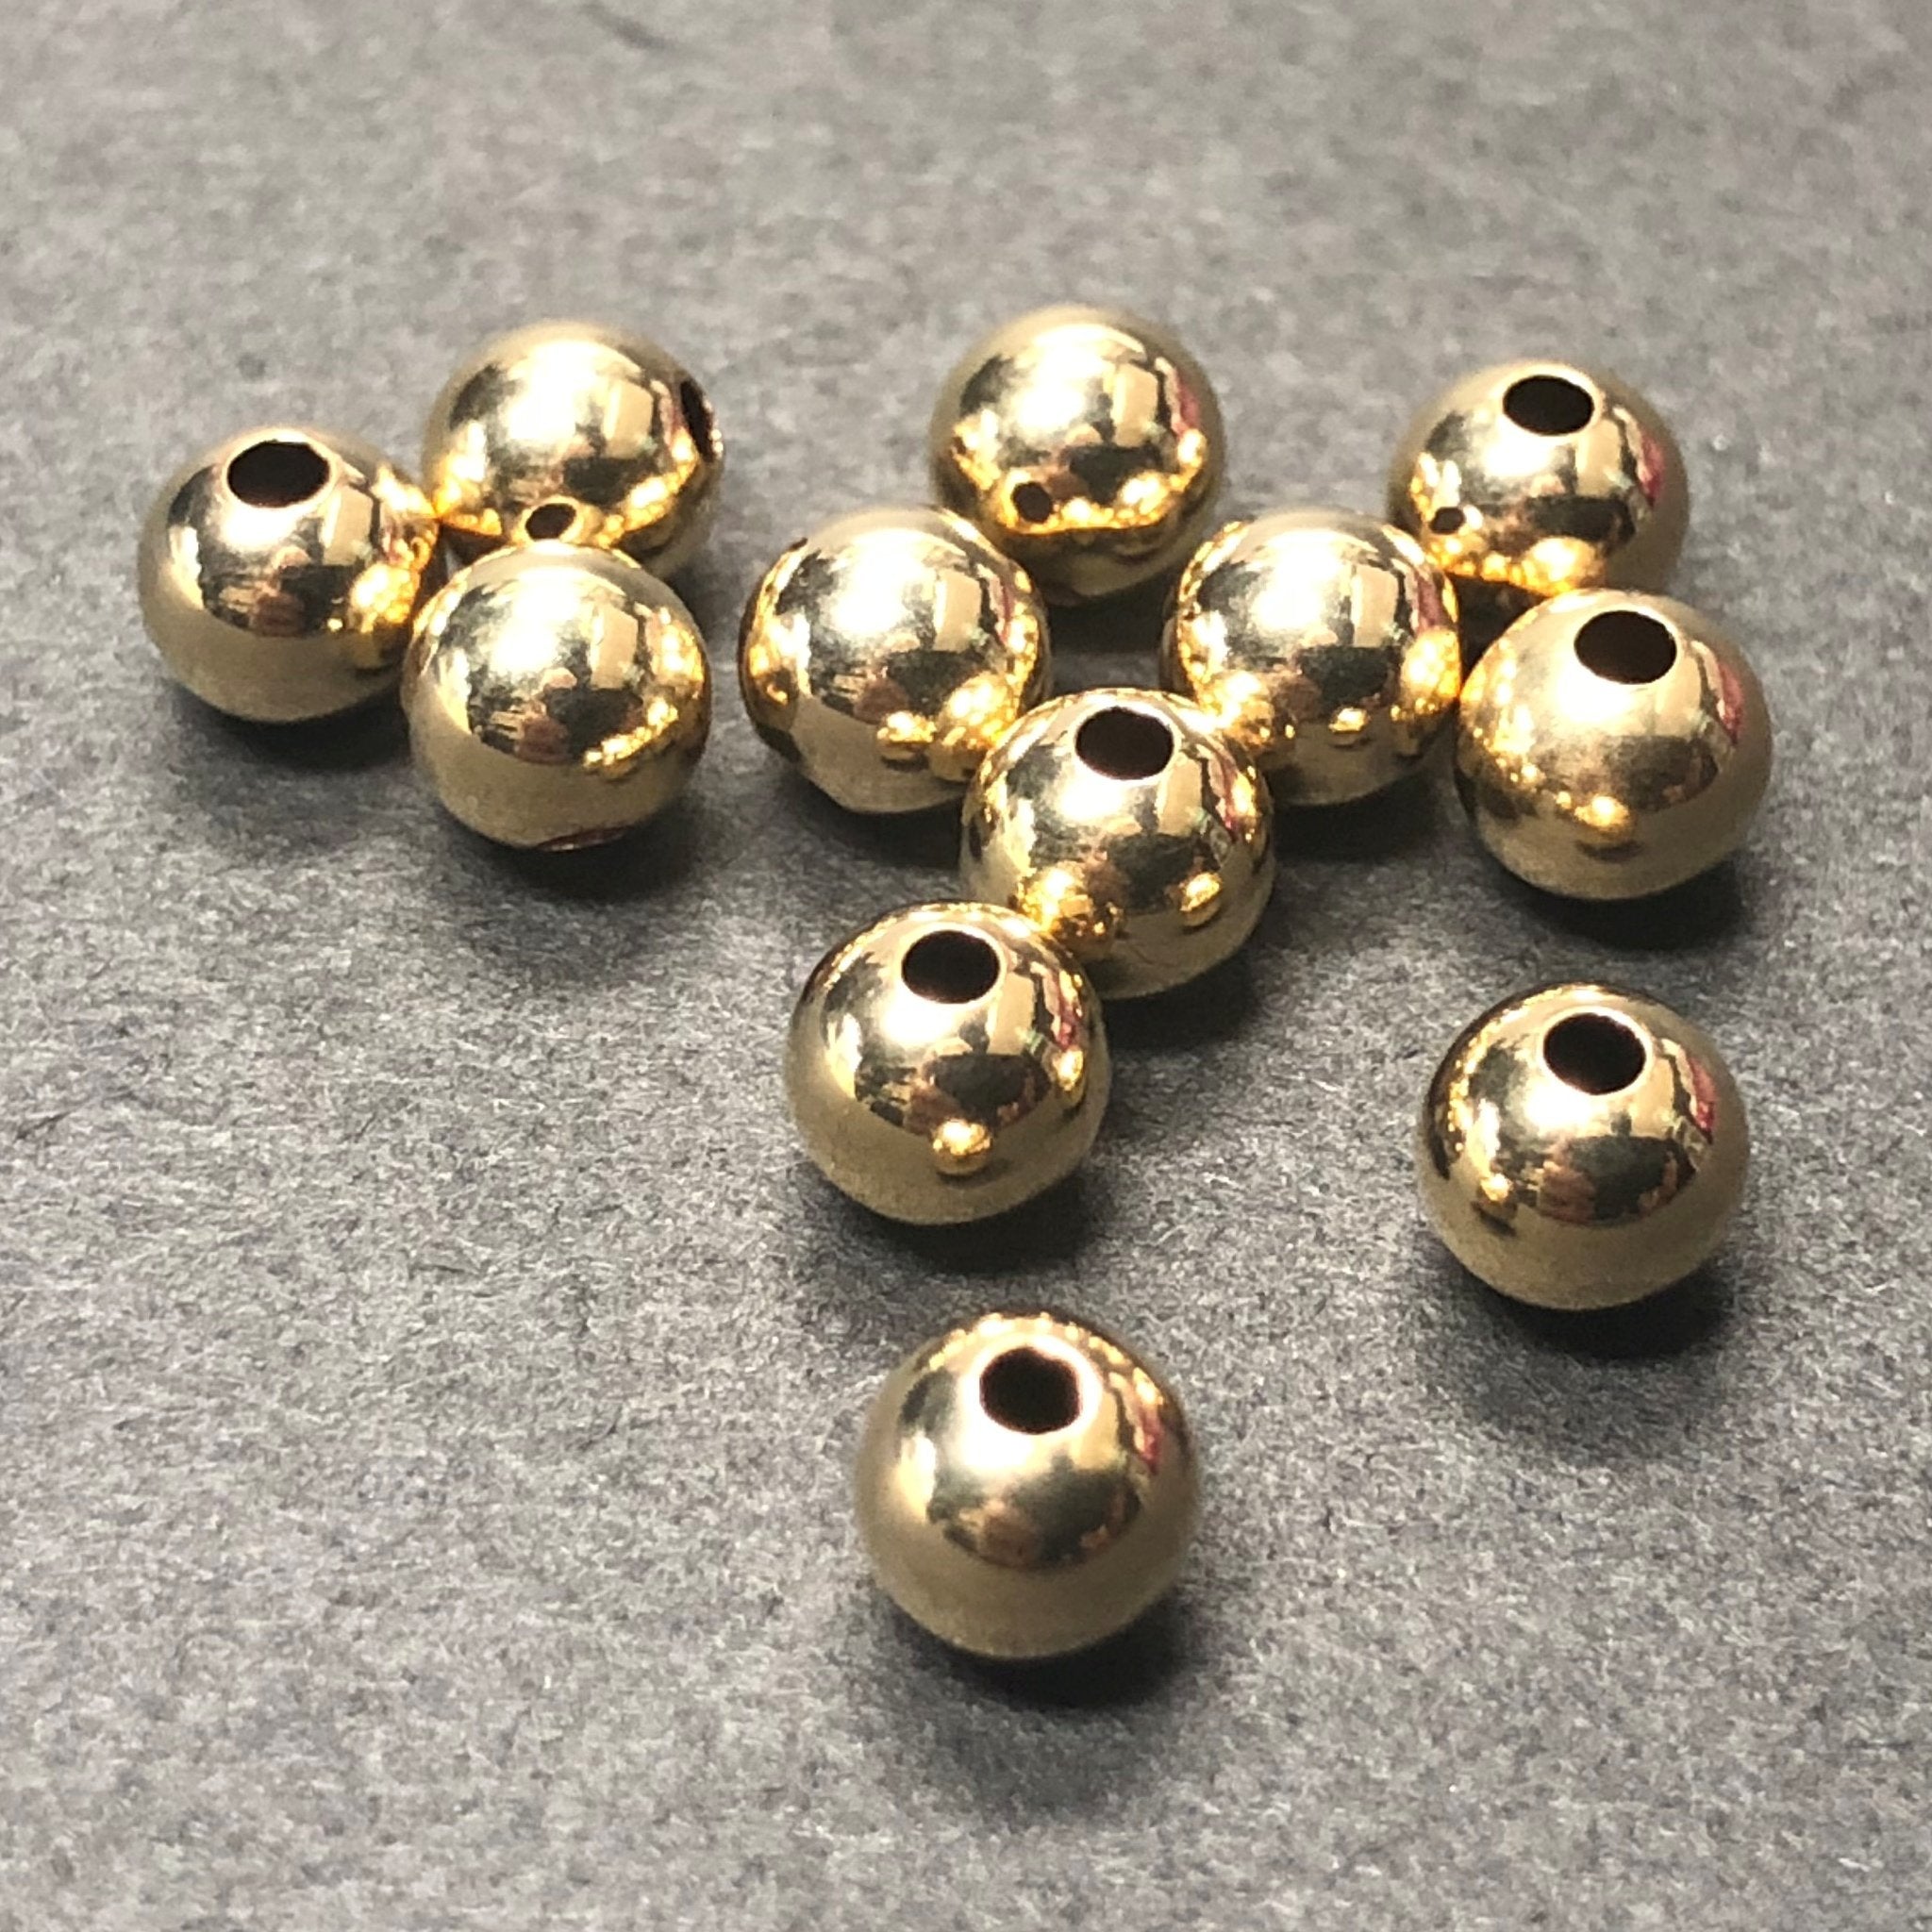 5mm Rondelle Spacer Beads, Antique Copper - Golden Age Beads